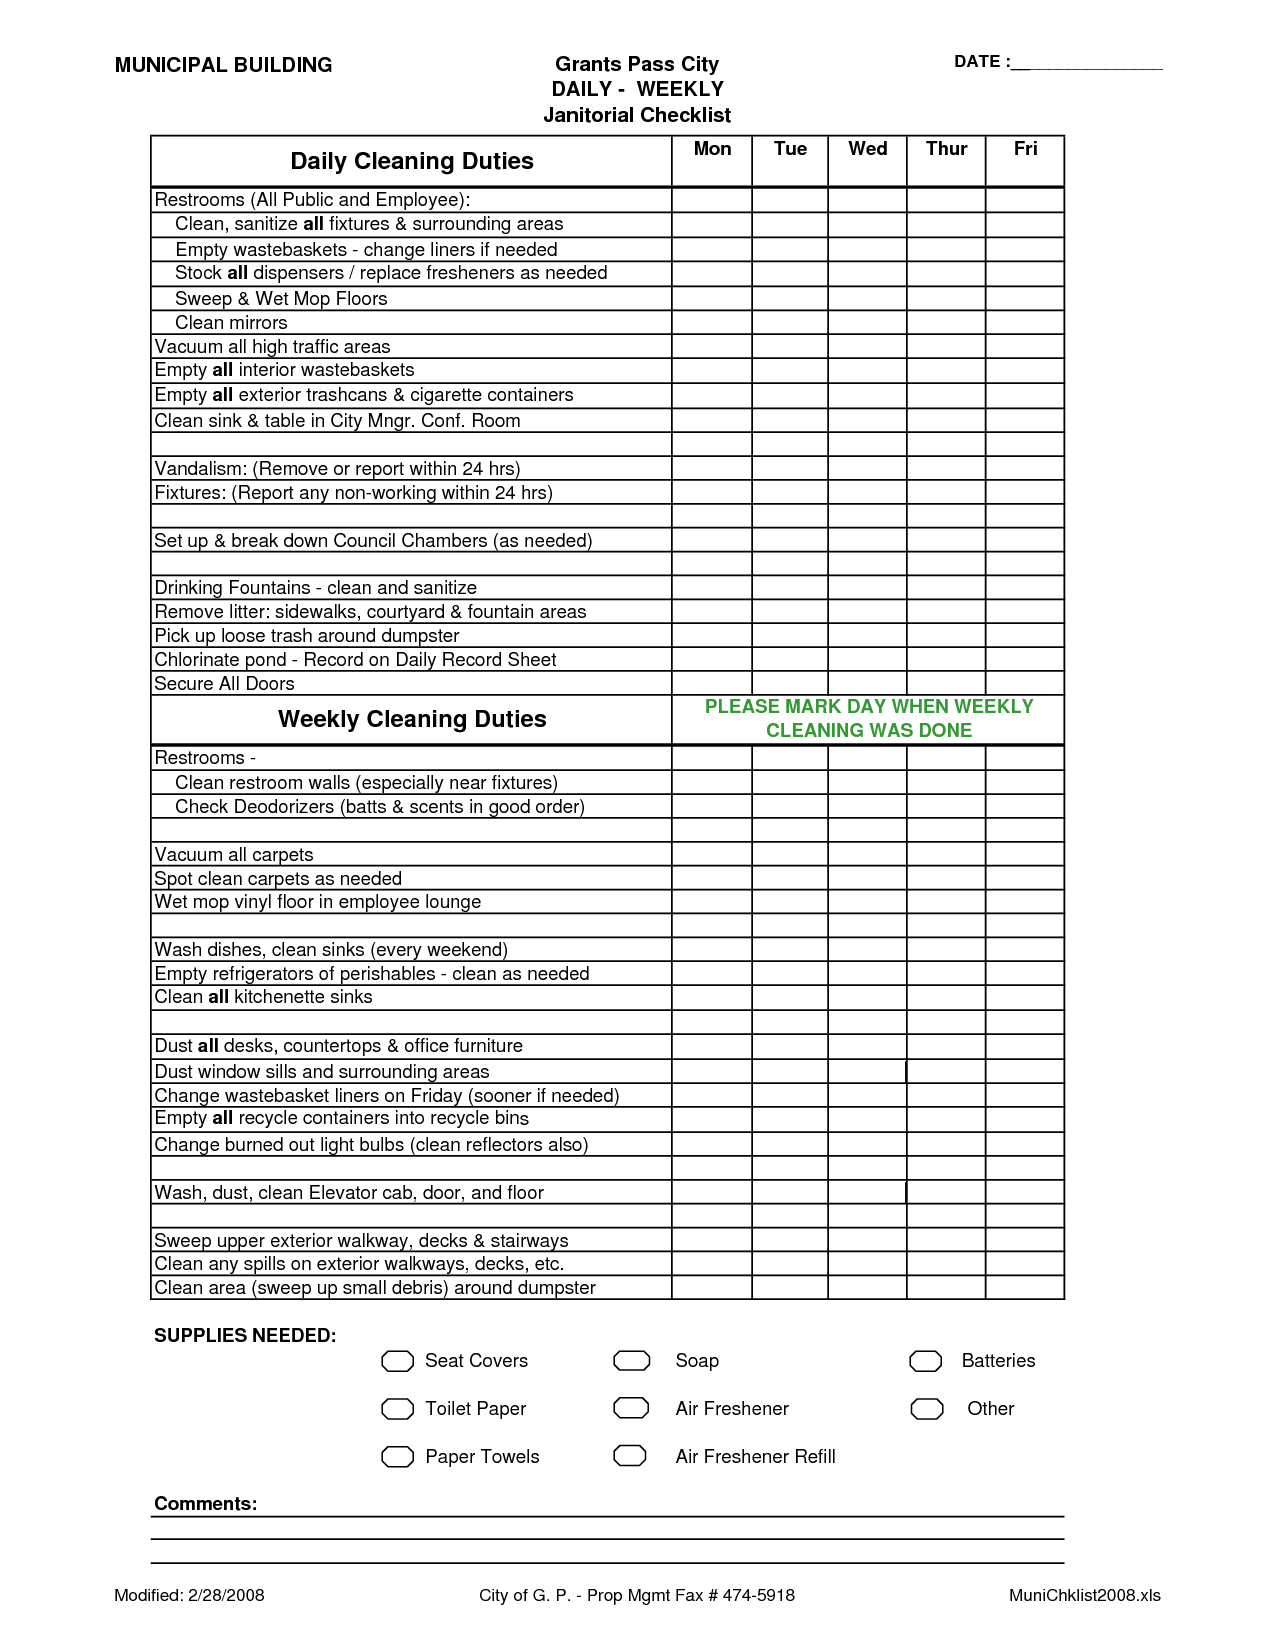 janitorial-checklist-template-charlotte-clergy-coalition